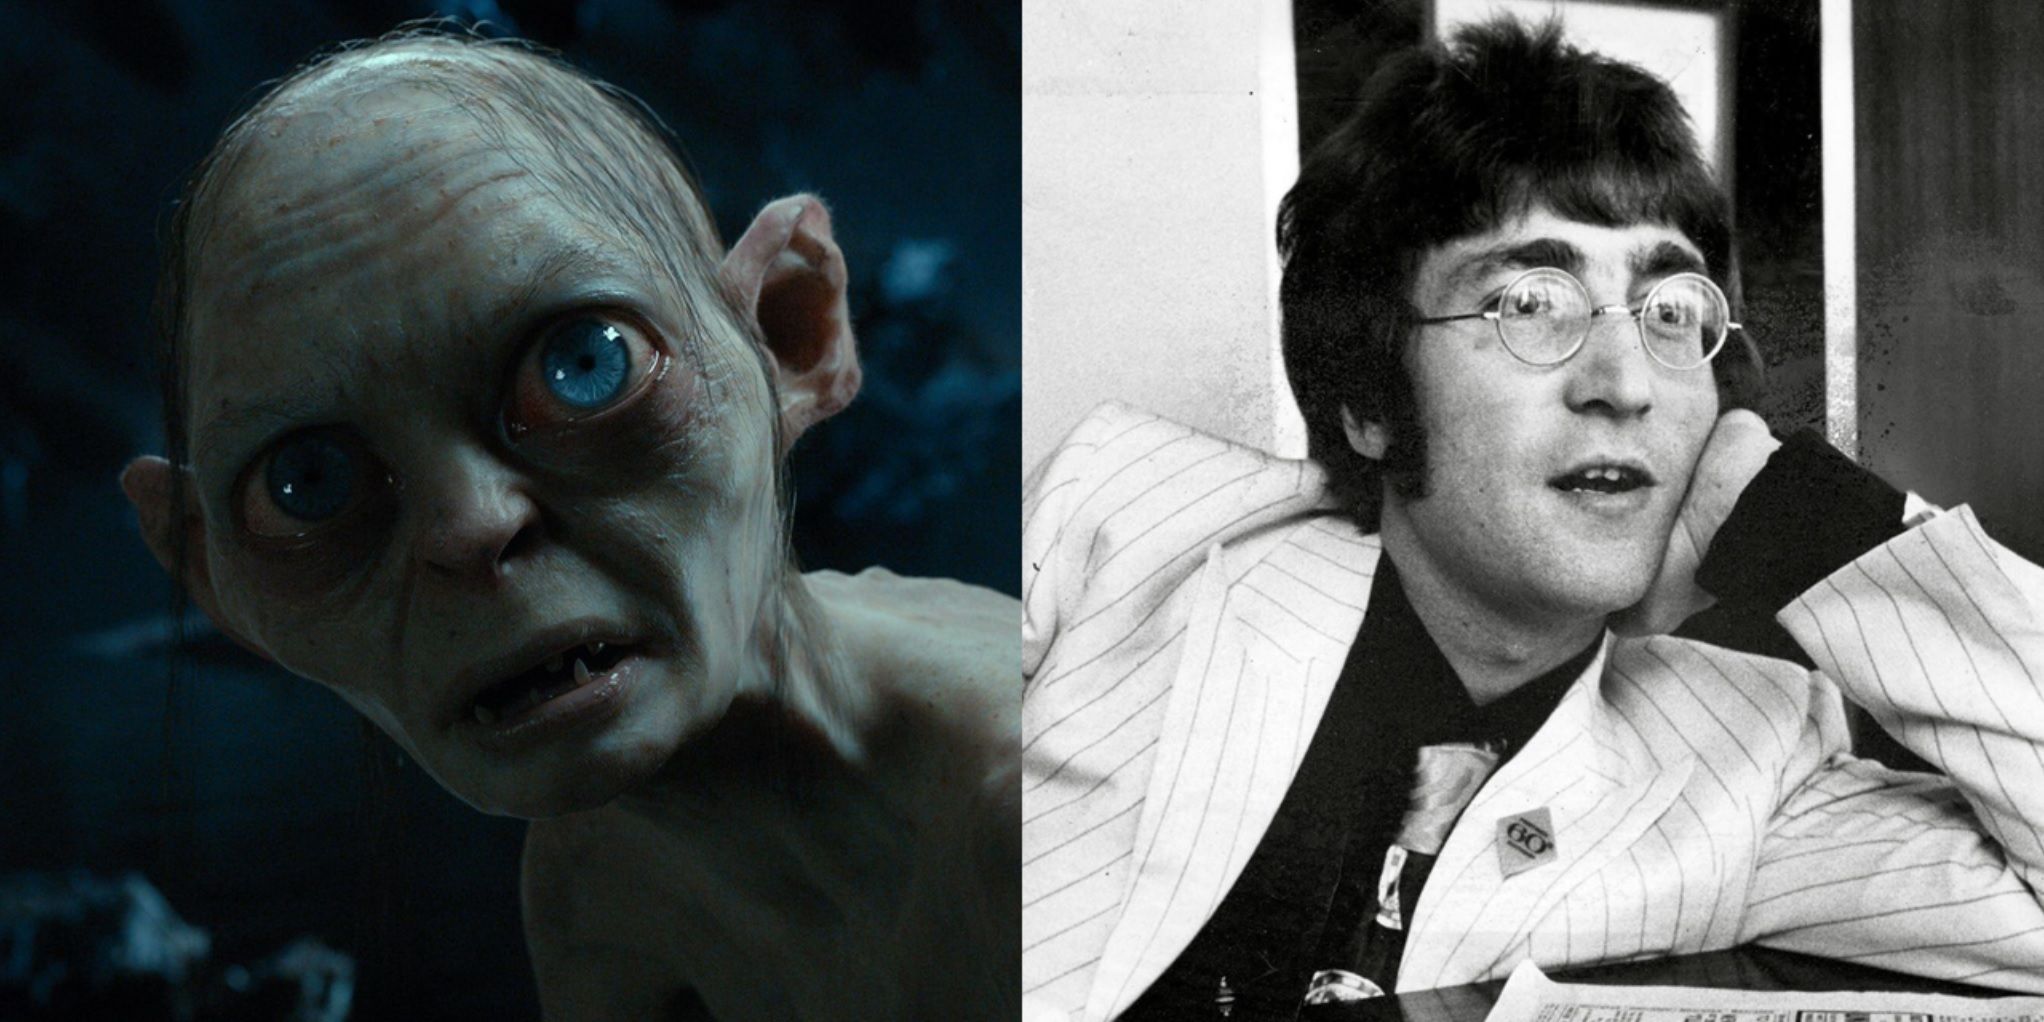 Split image of Gollum in The Lord of the Rings and John Lennon